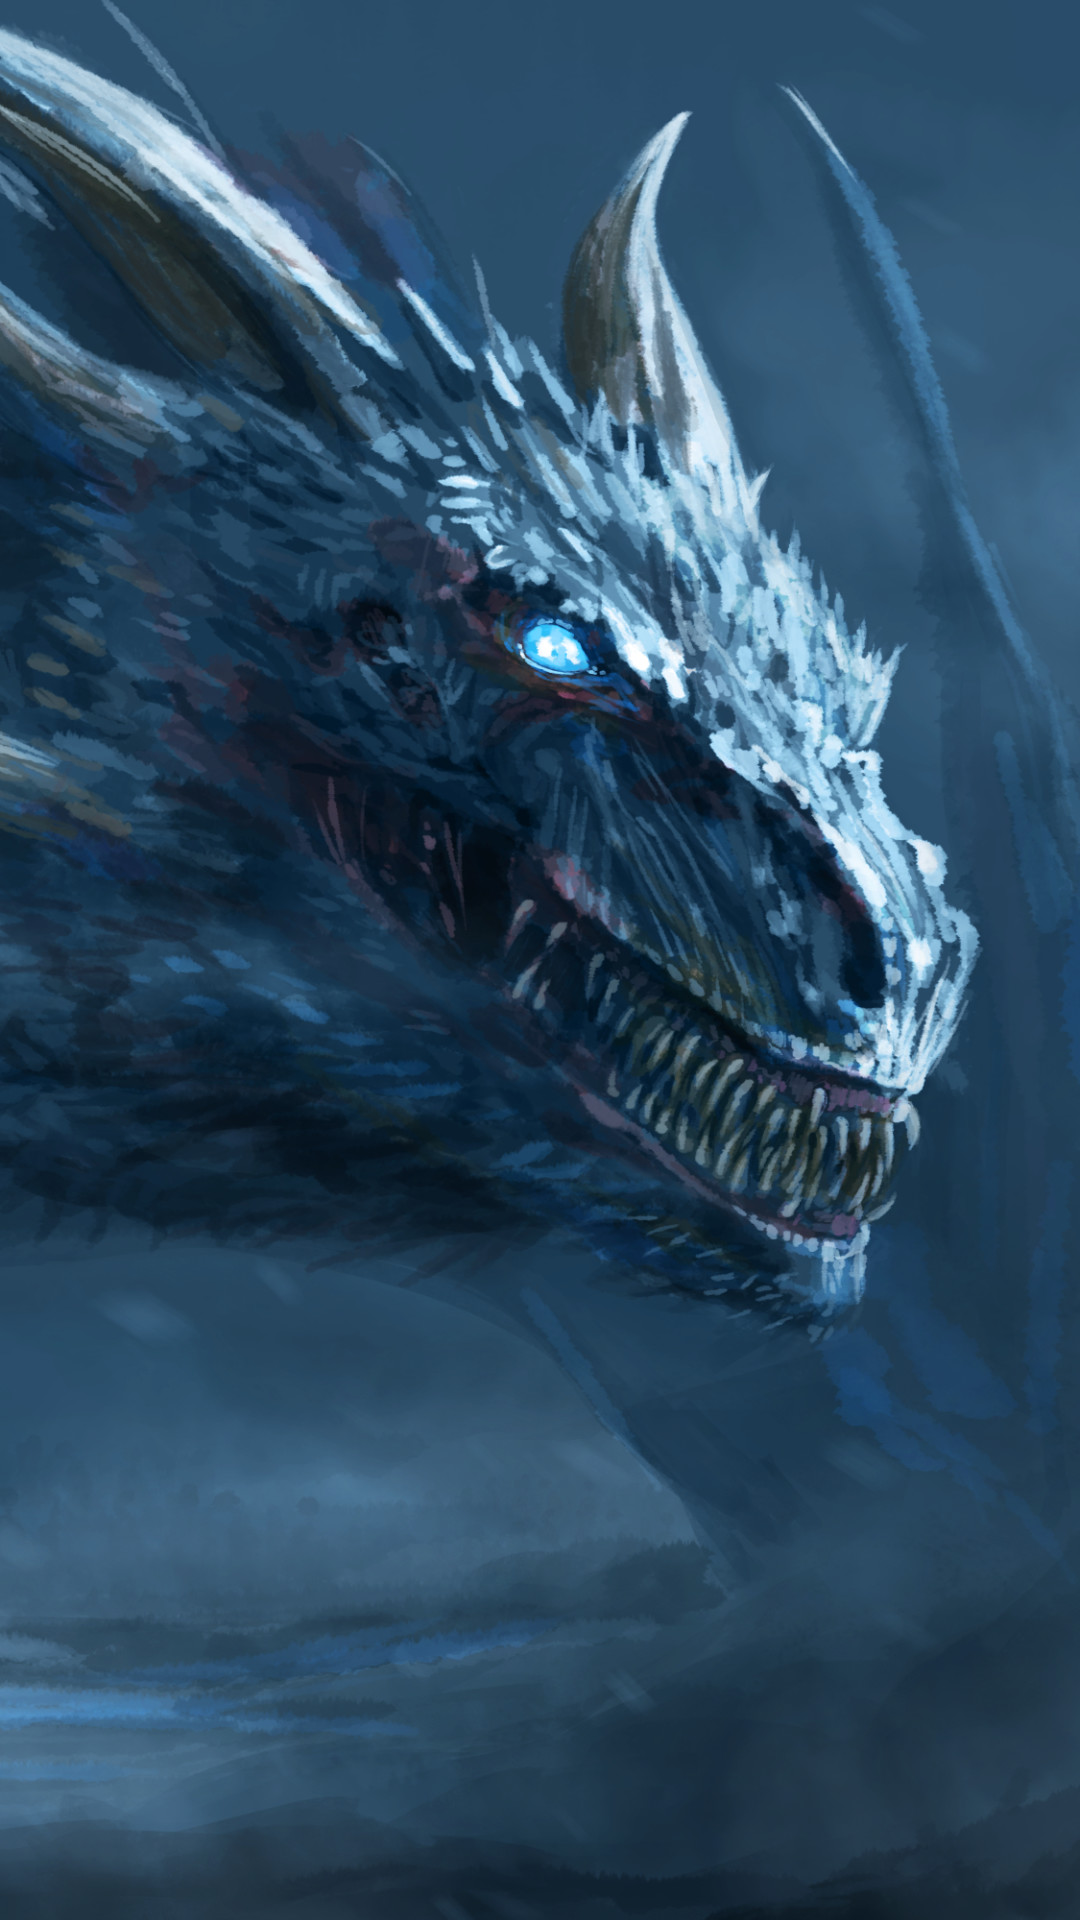 game of thrones mobile wallpaper,dragon,fictional character,mythical creature,jaw,cg artwork